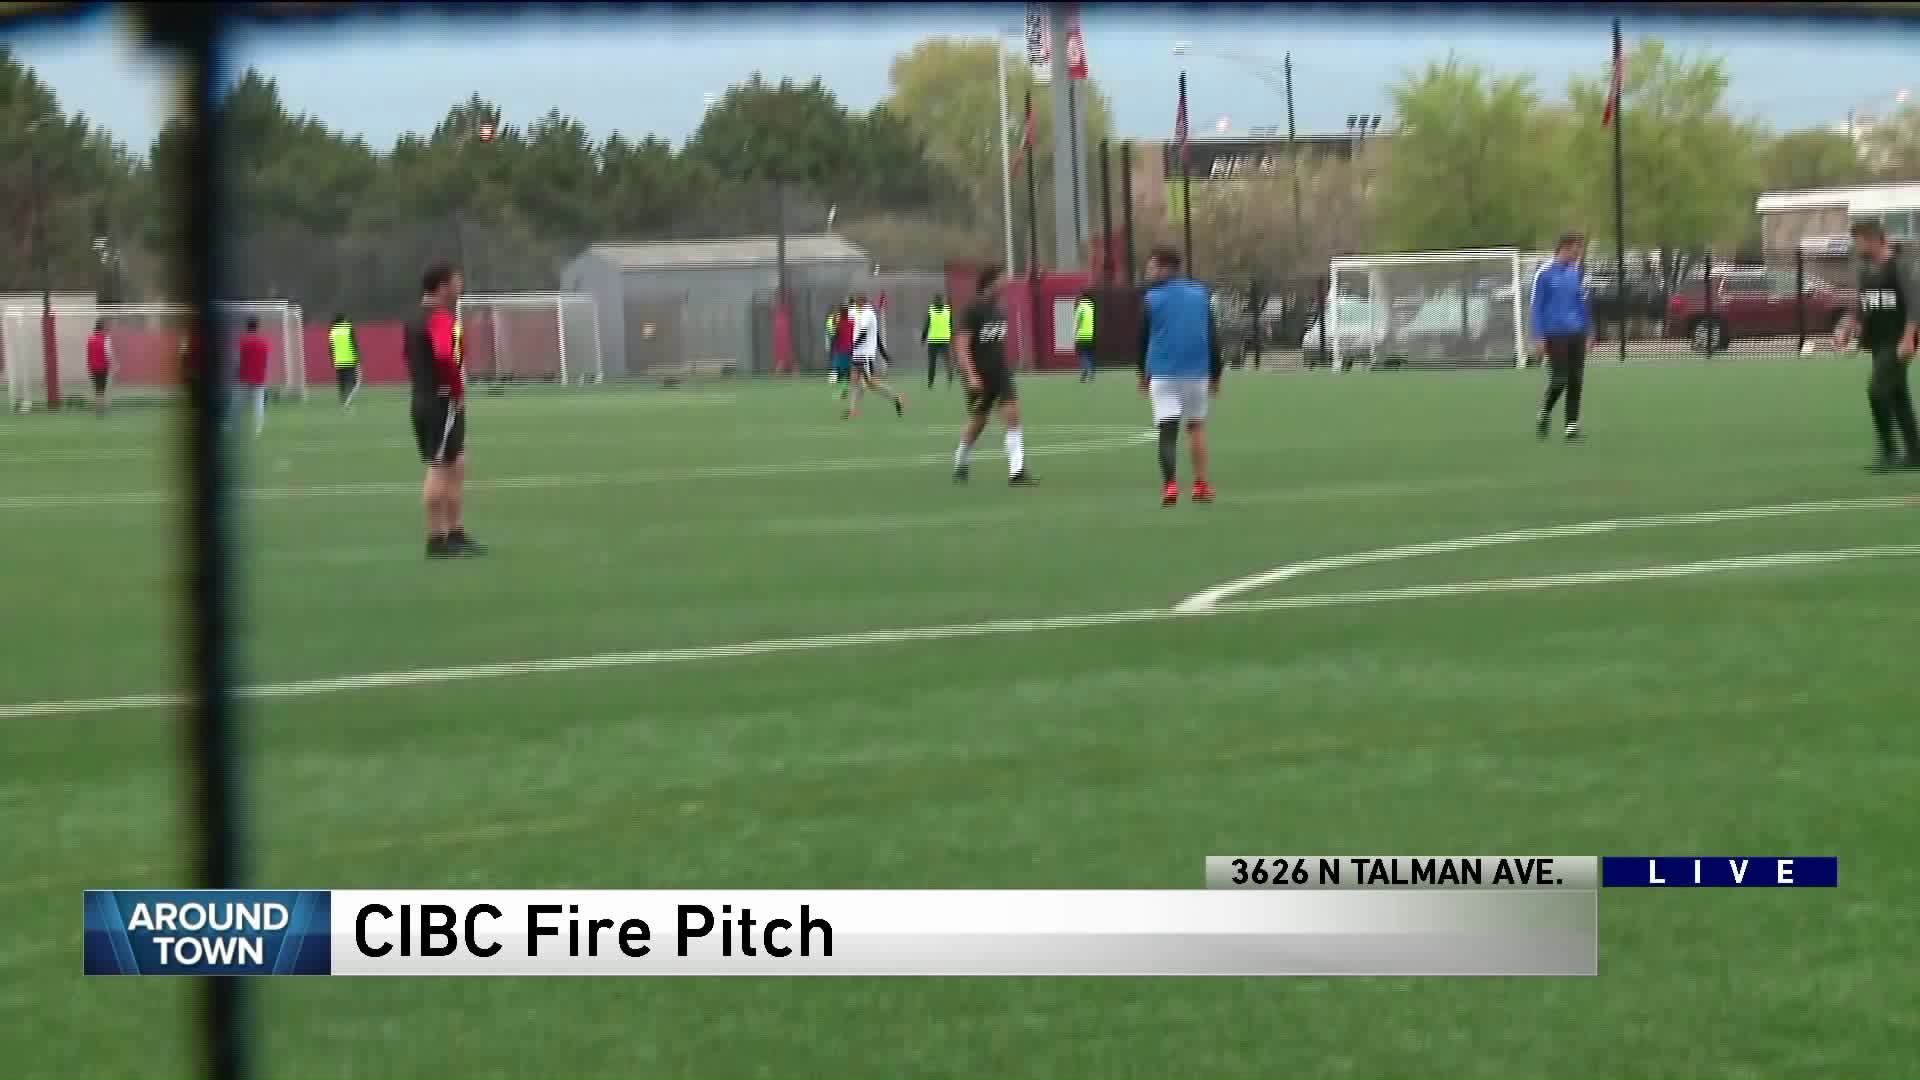 Around Town checks out CIBC Fire Pitch